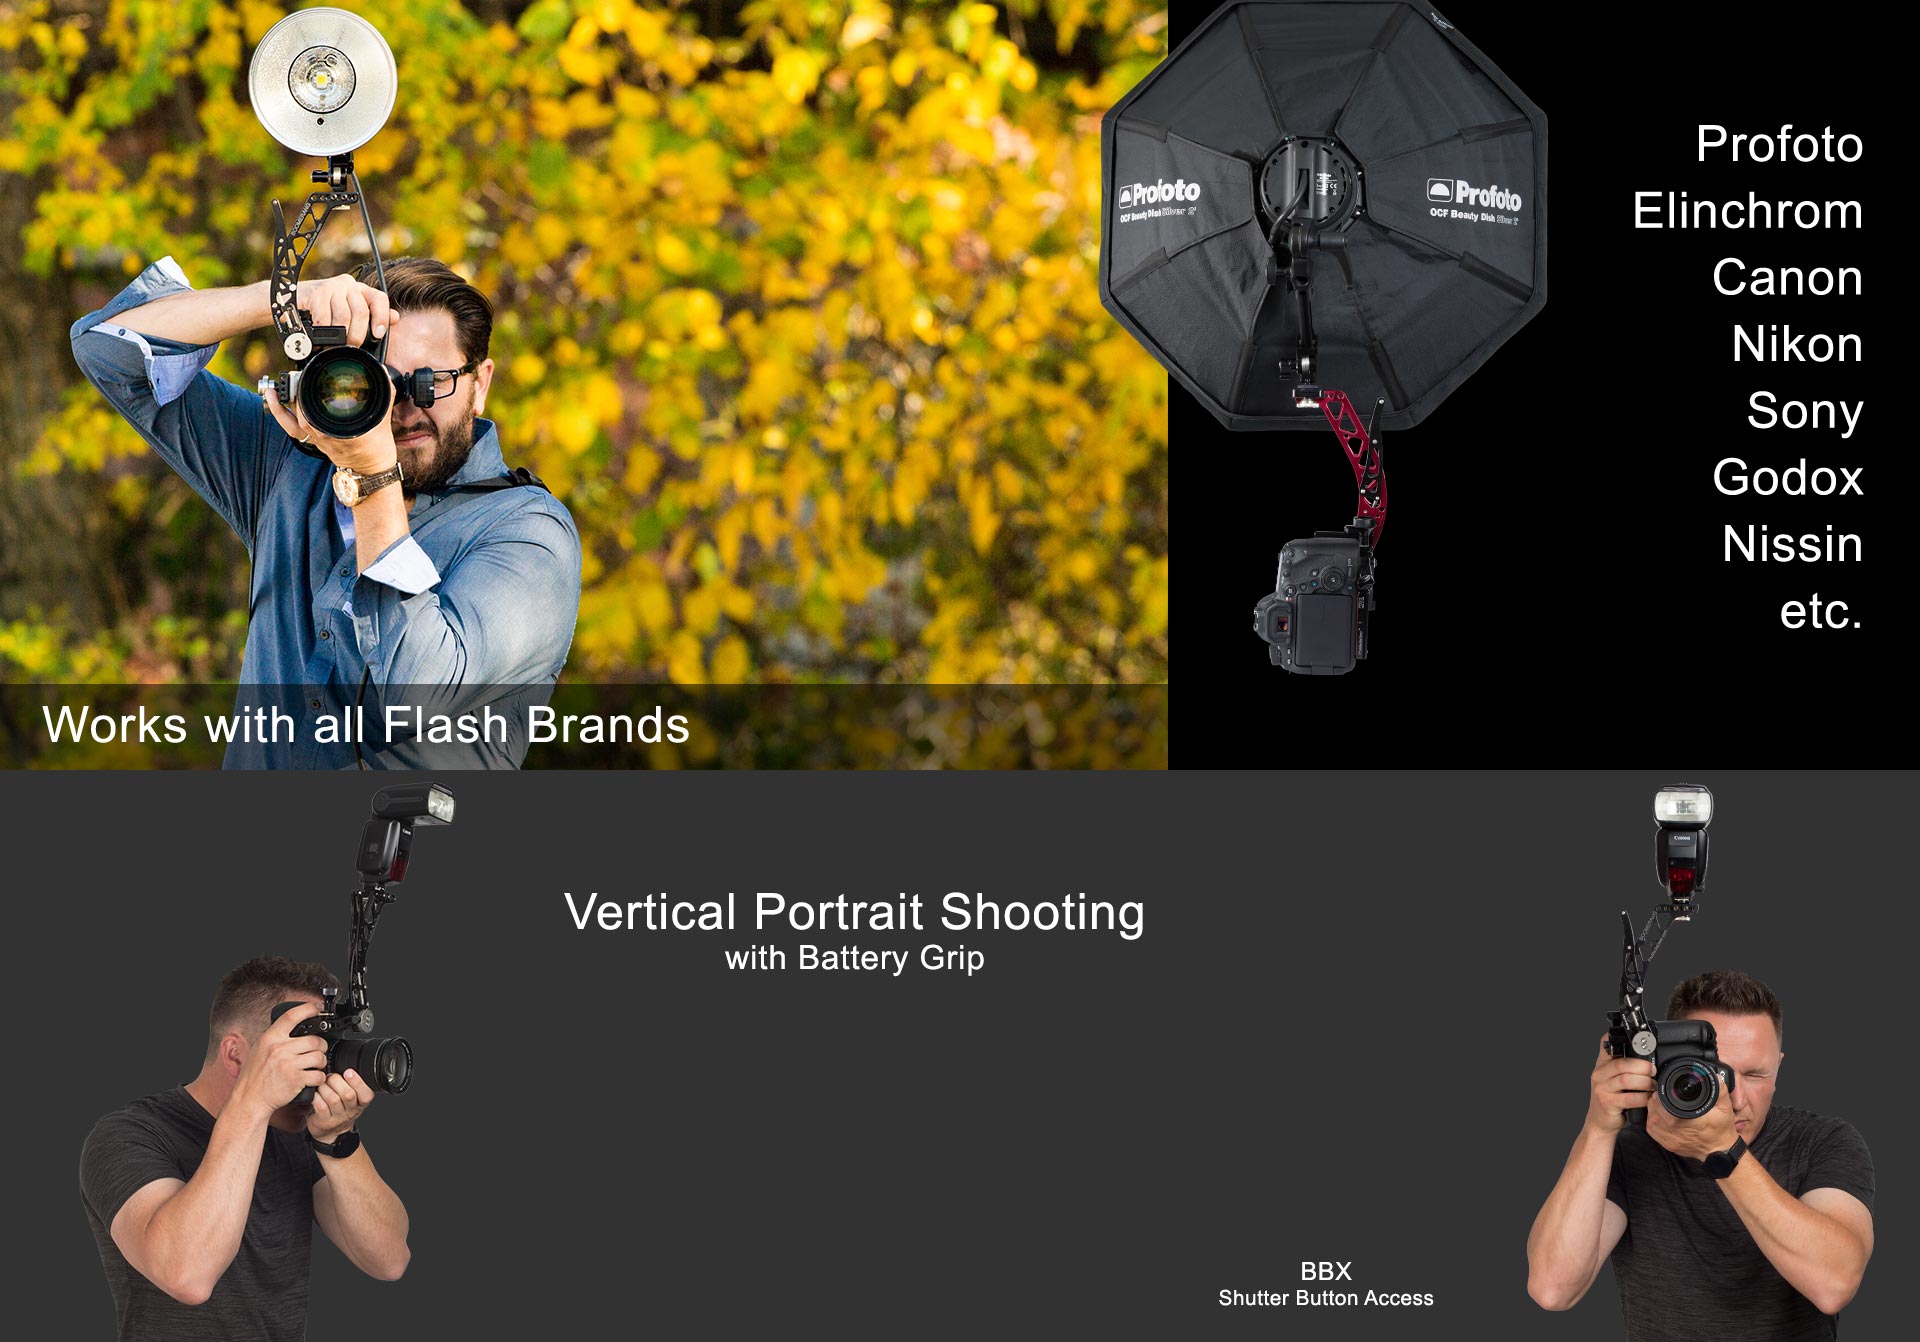 Boomerang Flash Bracket works with all camera and flash brands